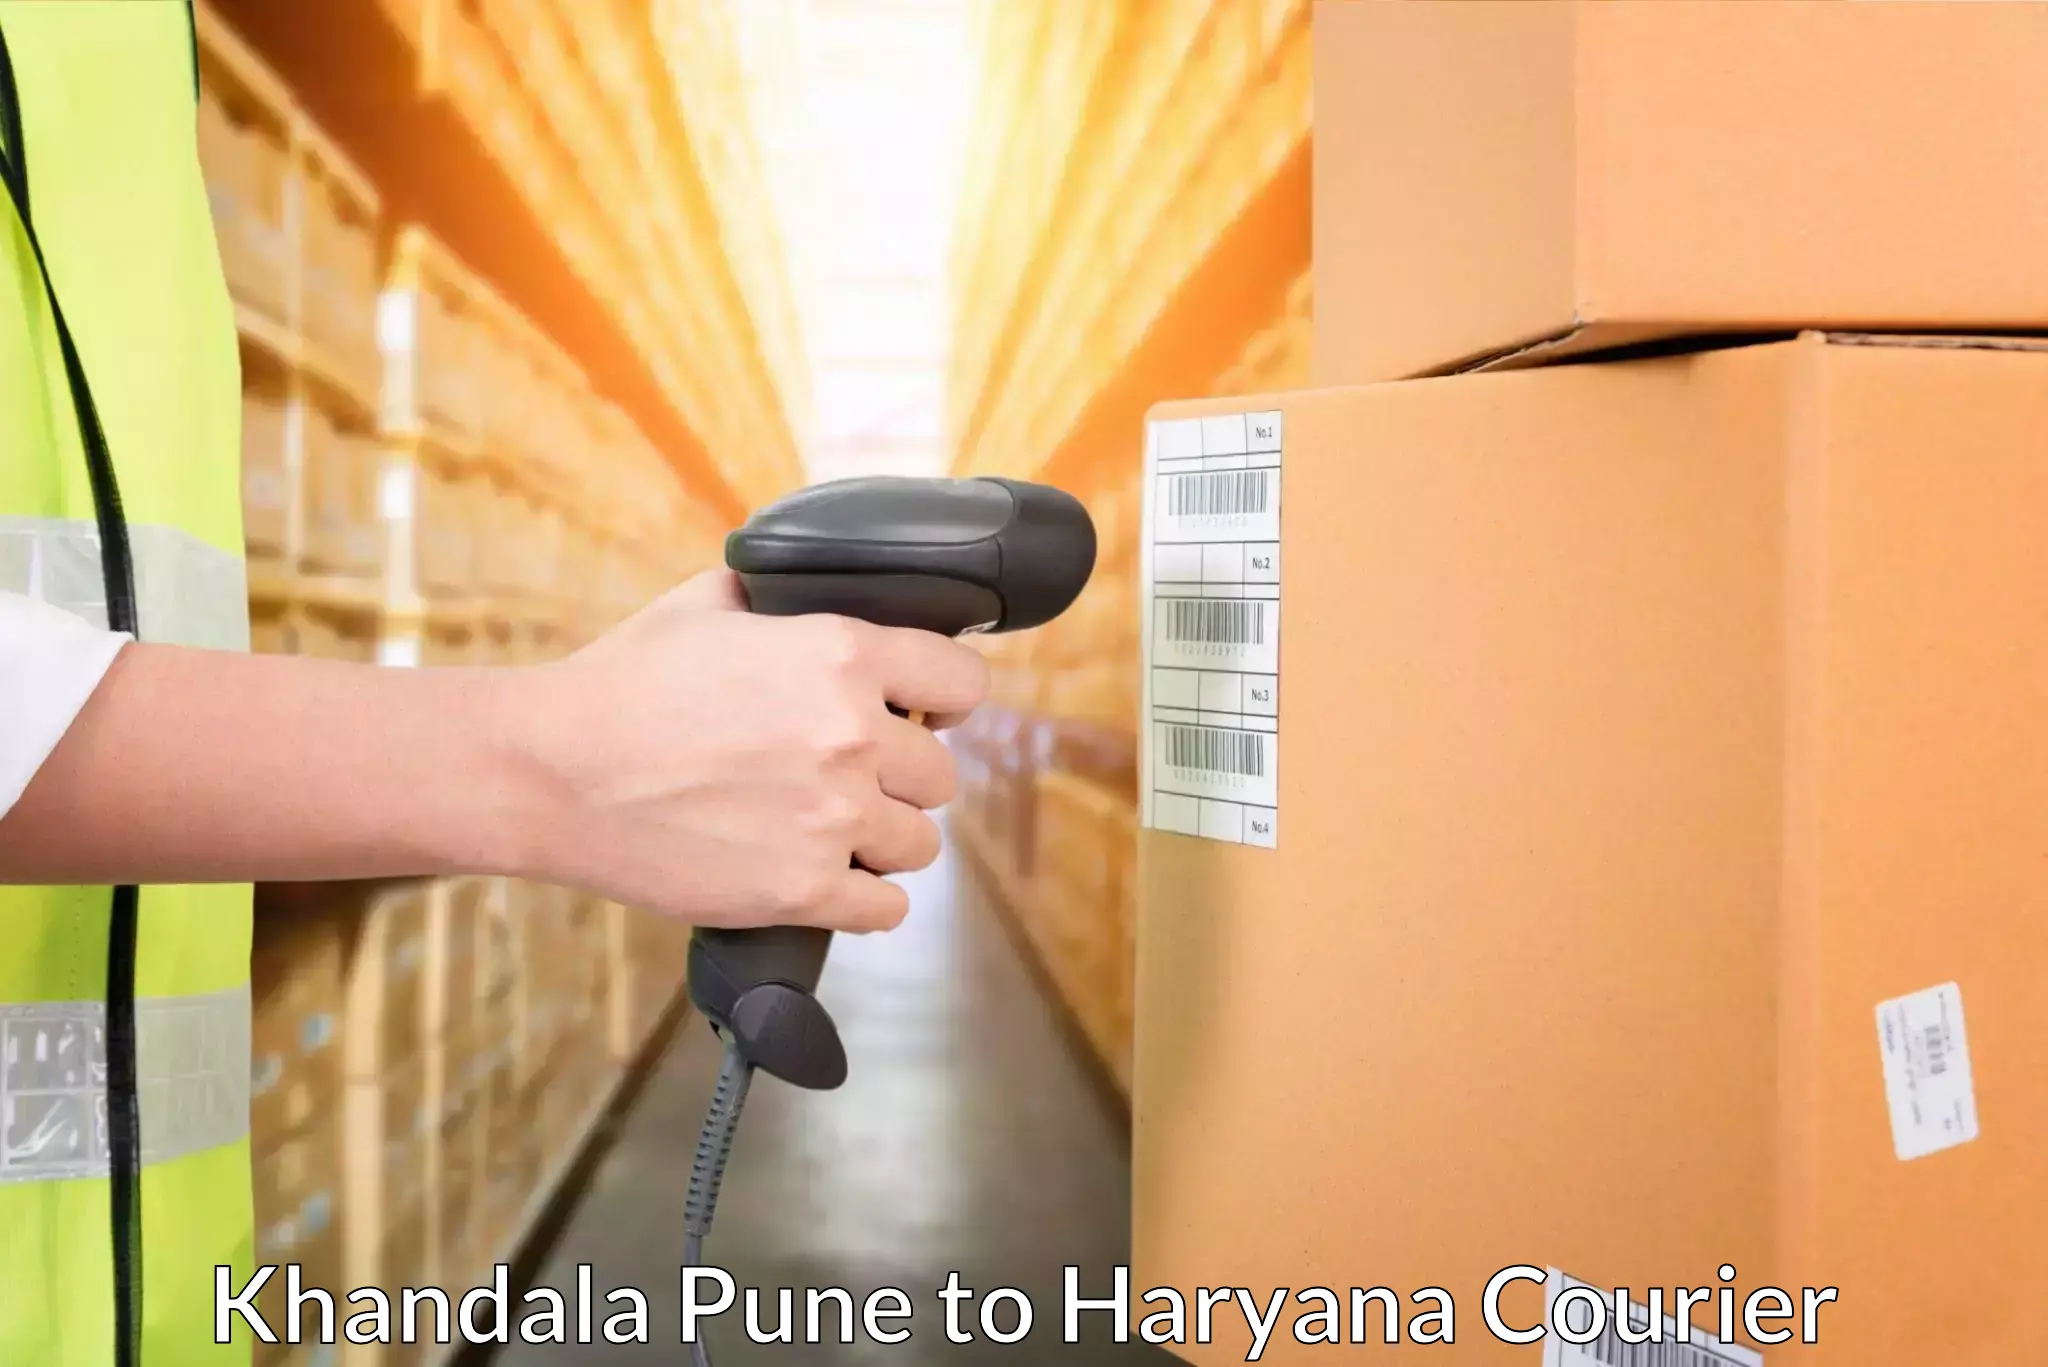 Flexible delivery schedules Khandala Pune to Panipat